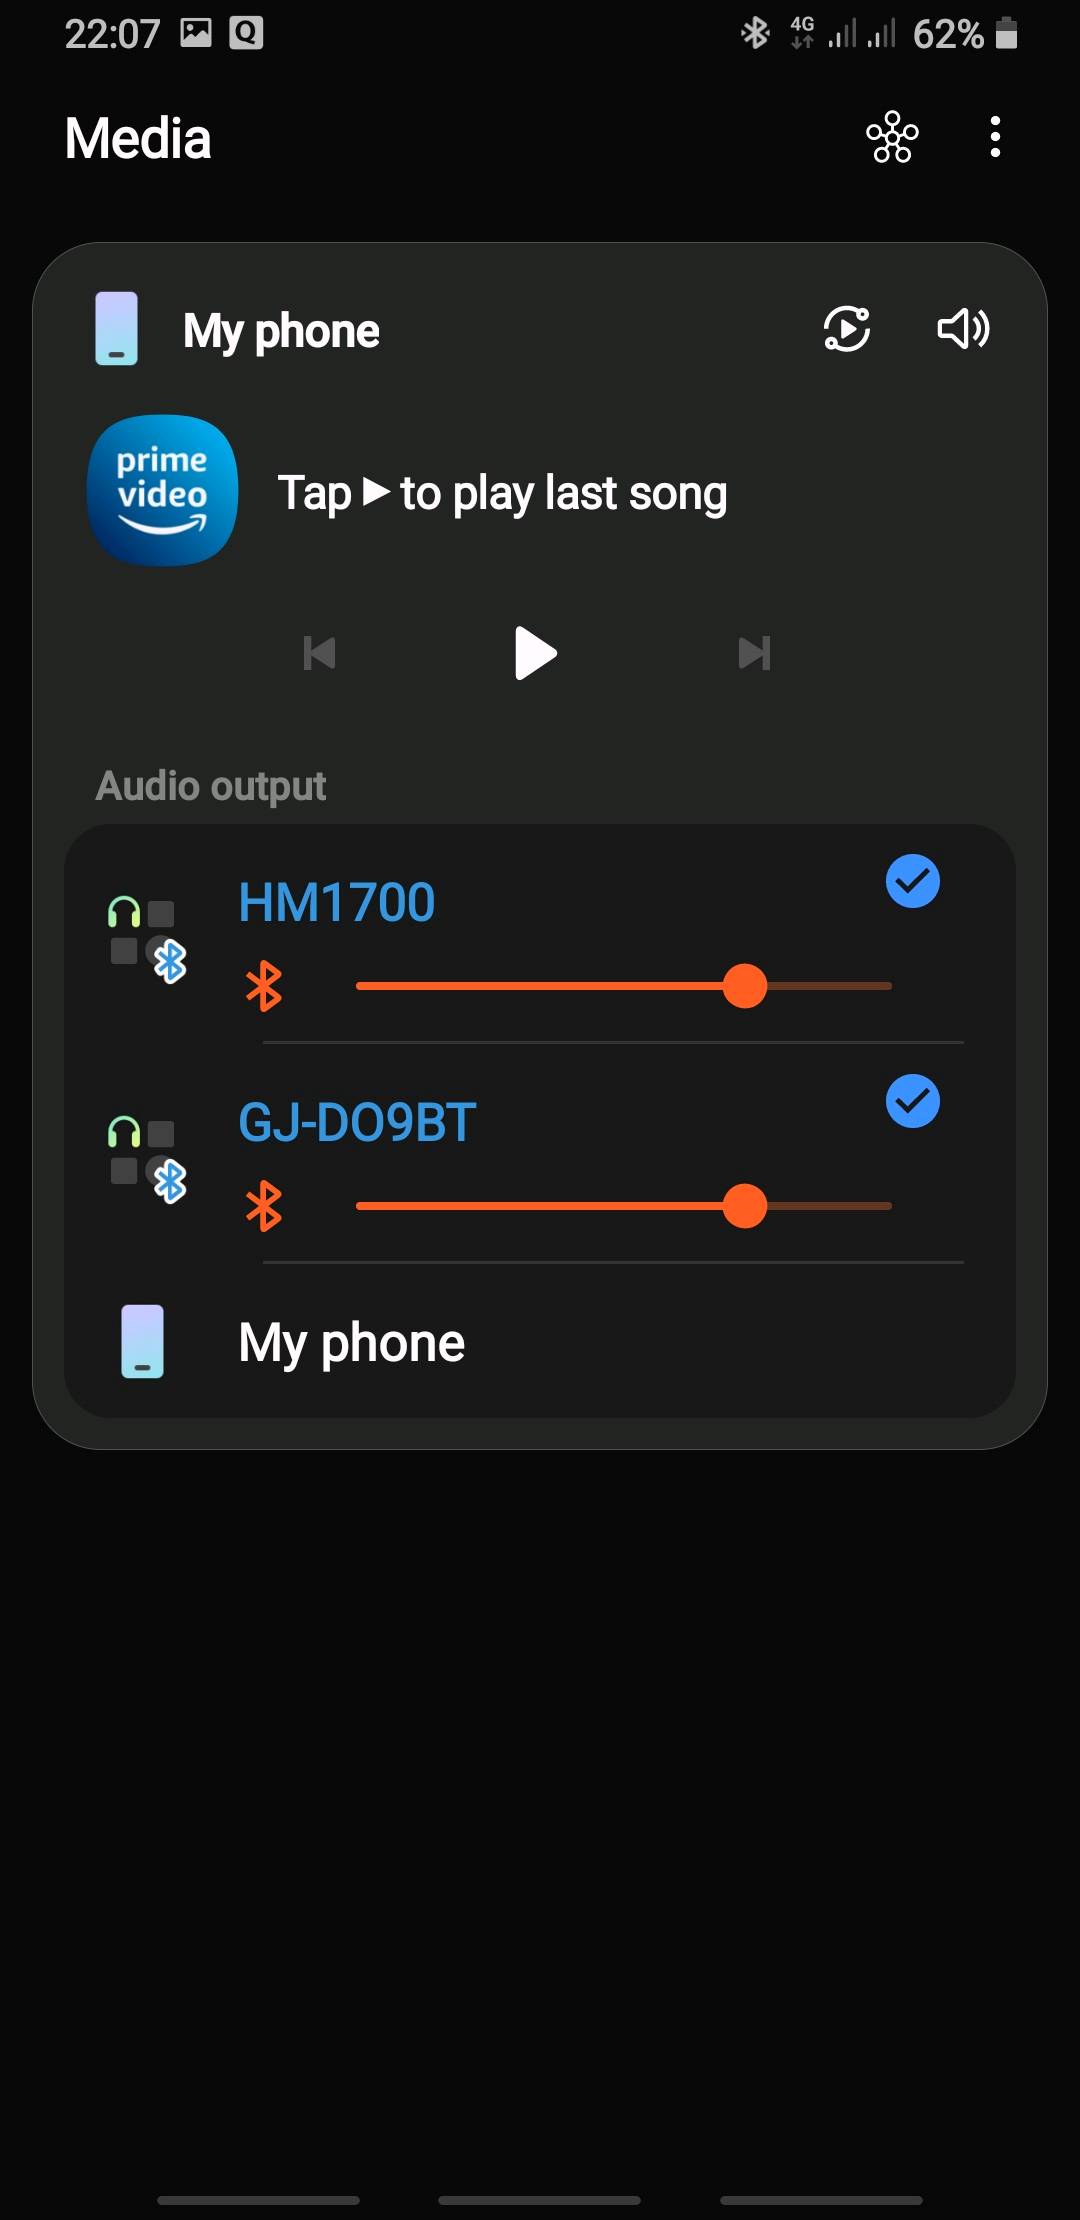 Dual Audio,Missing in Android 10 - Samsung Members